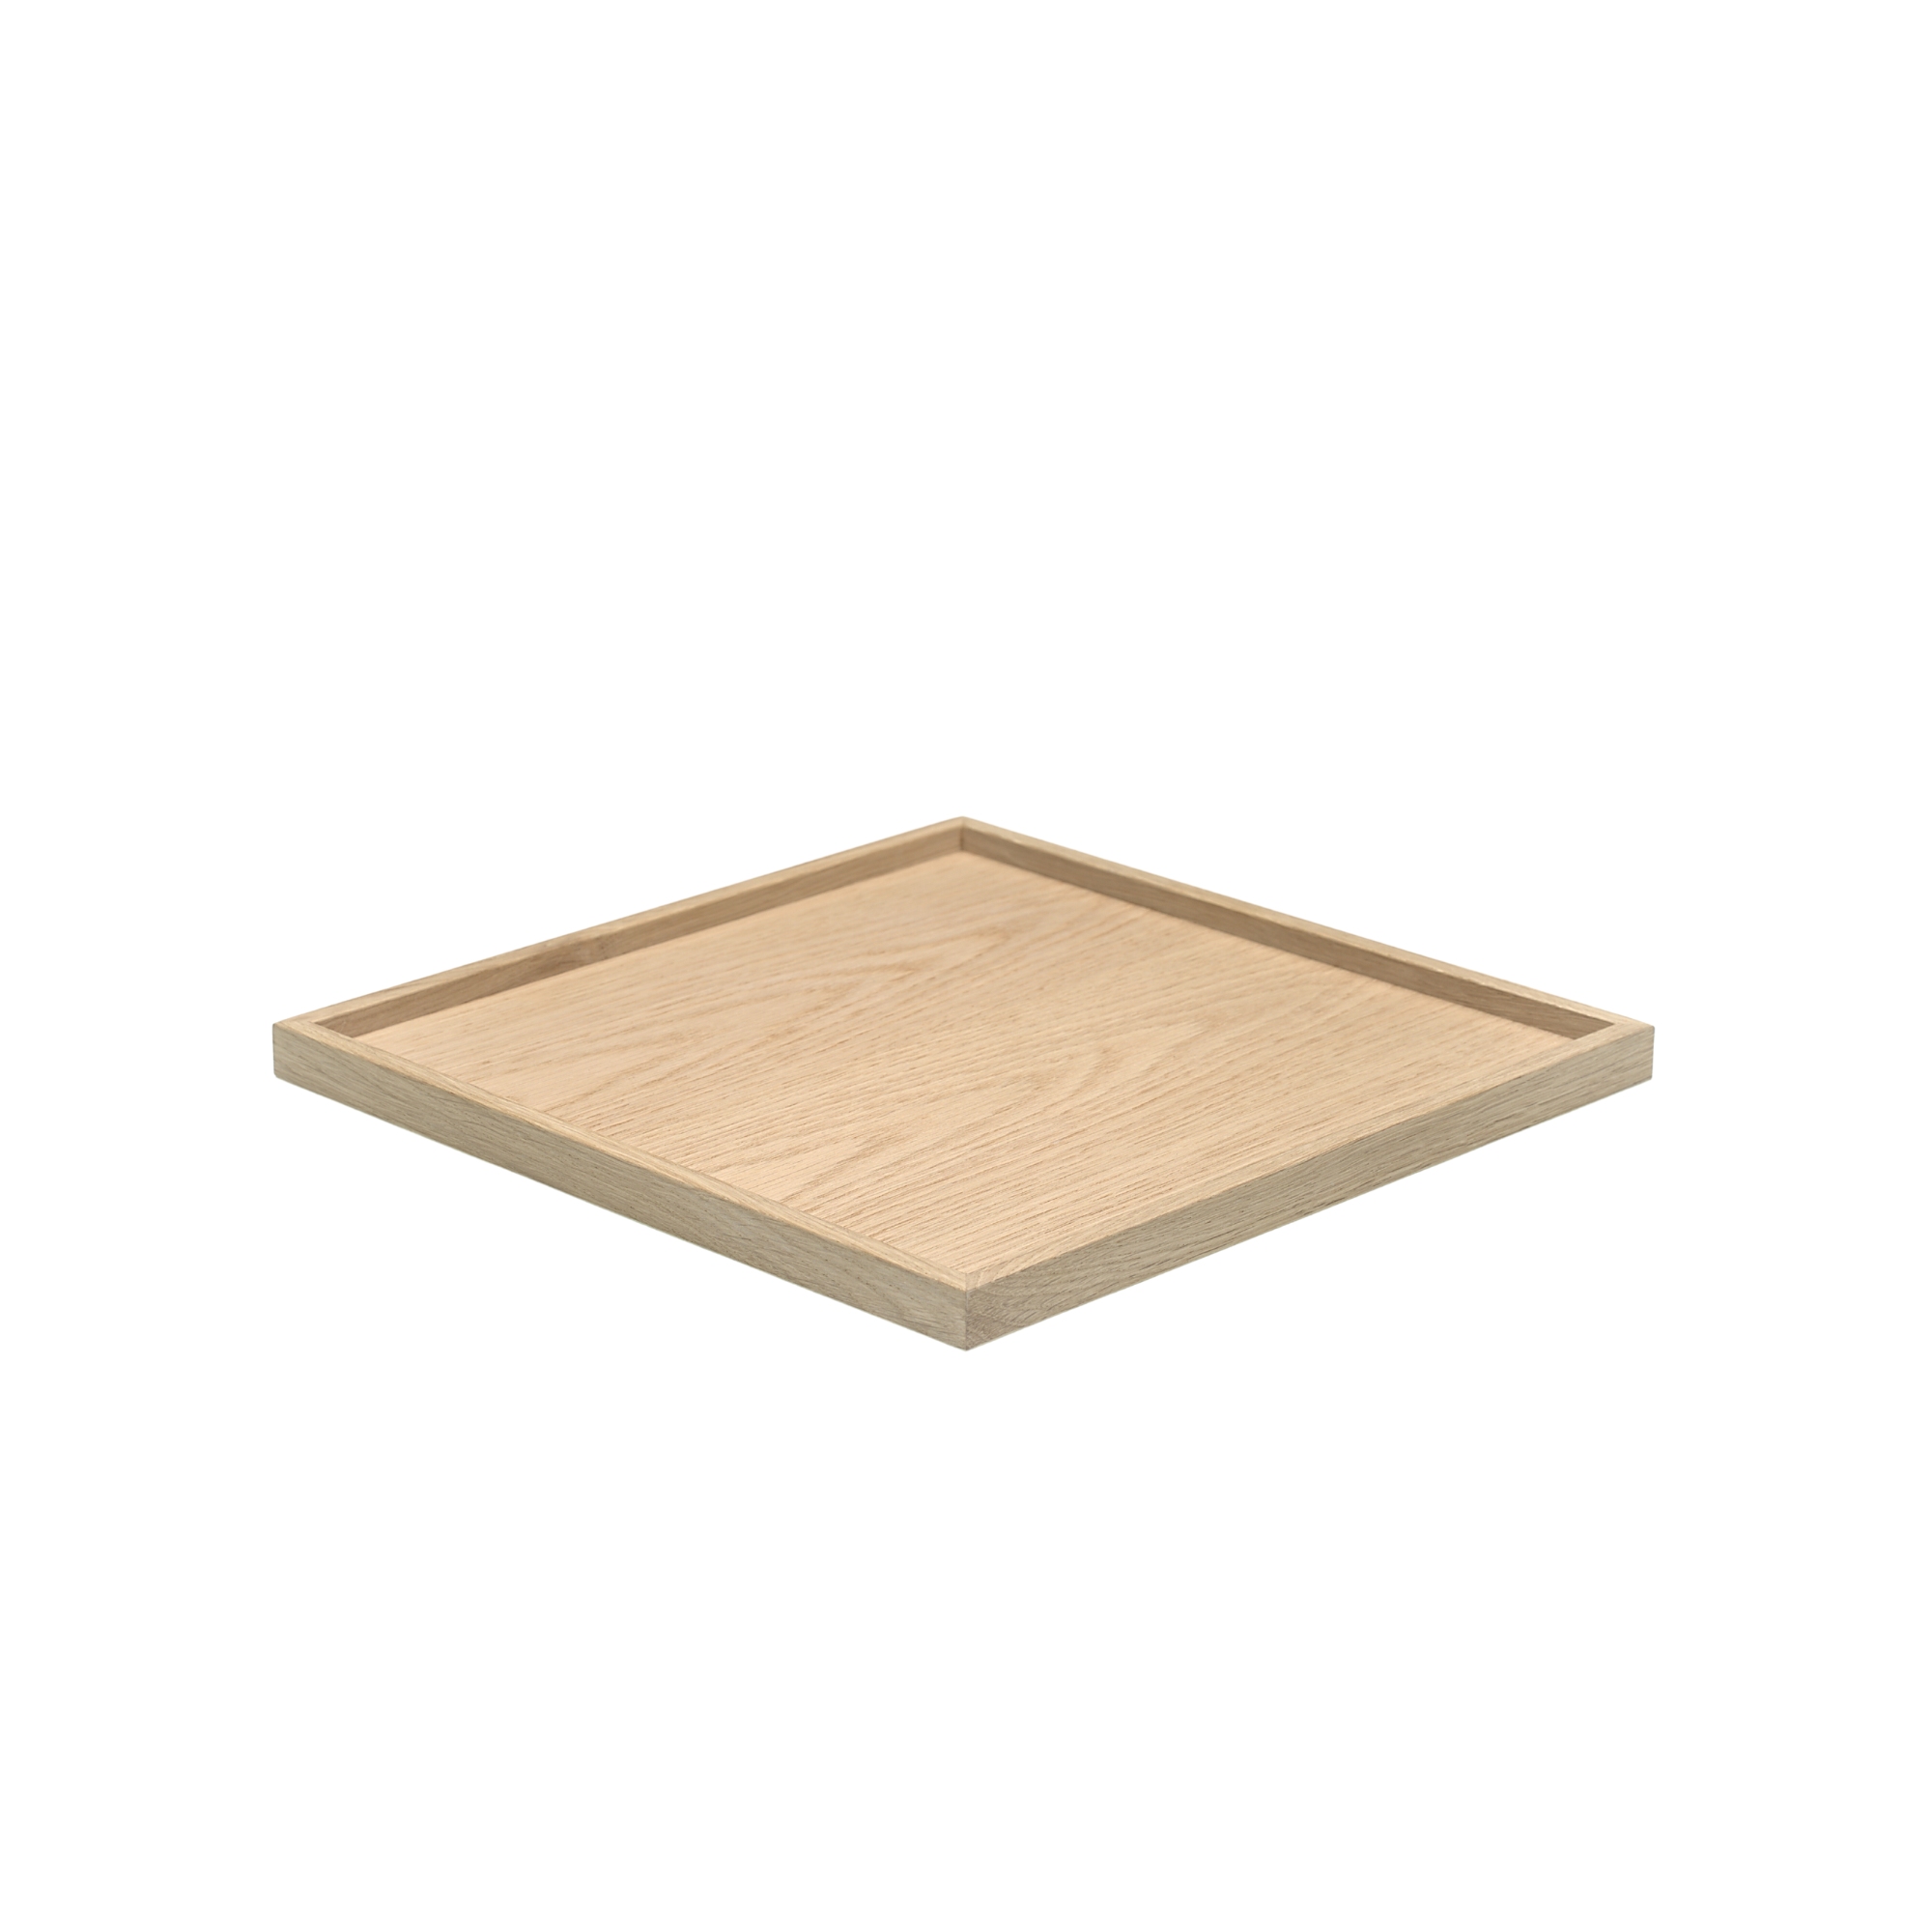 von Men The TRAY Oak I Tablett Couch HolzDesignPur SQUARE